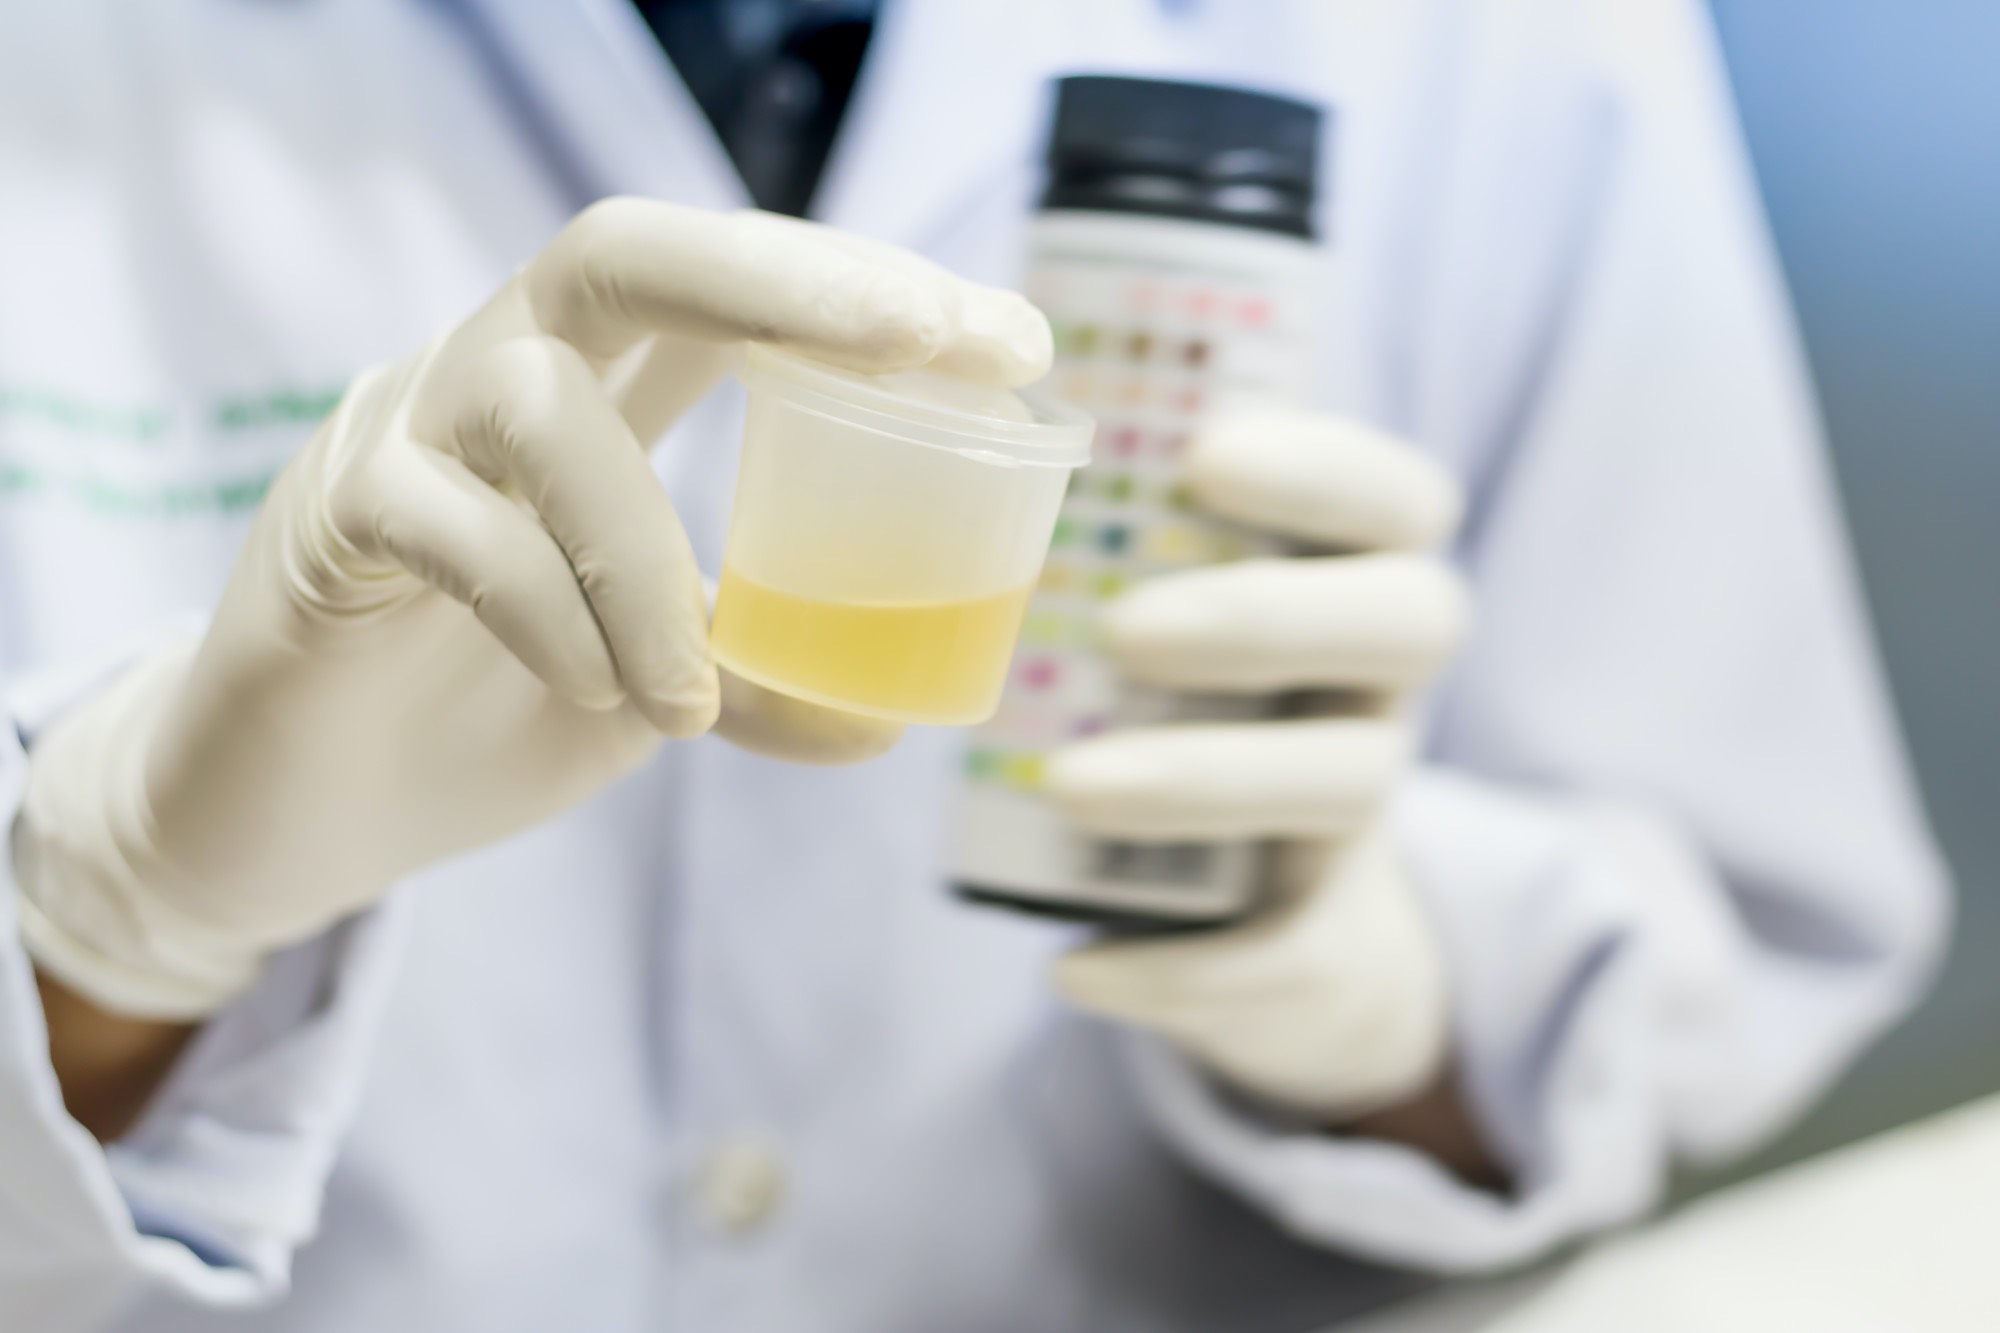 4 Top Foods to Avoid Before a Urine Drug Test